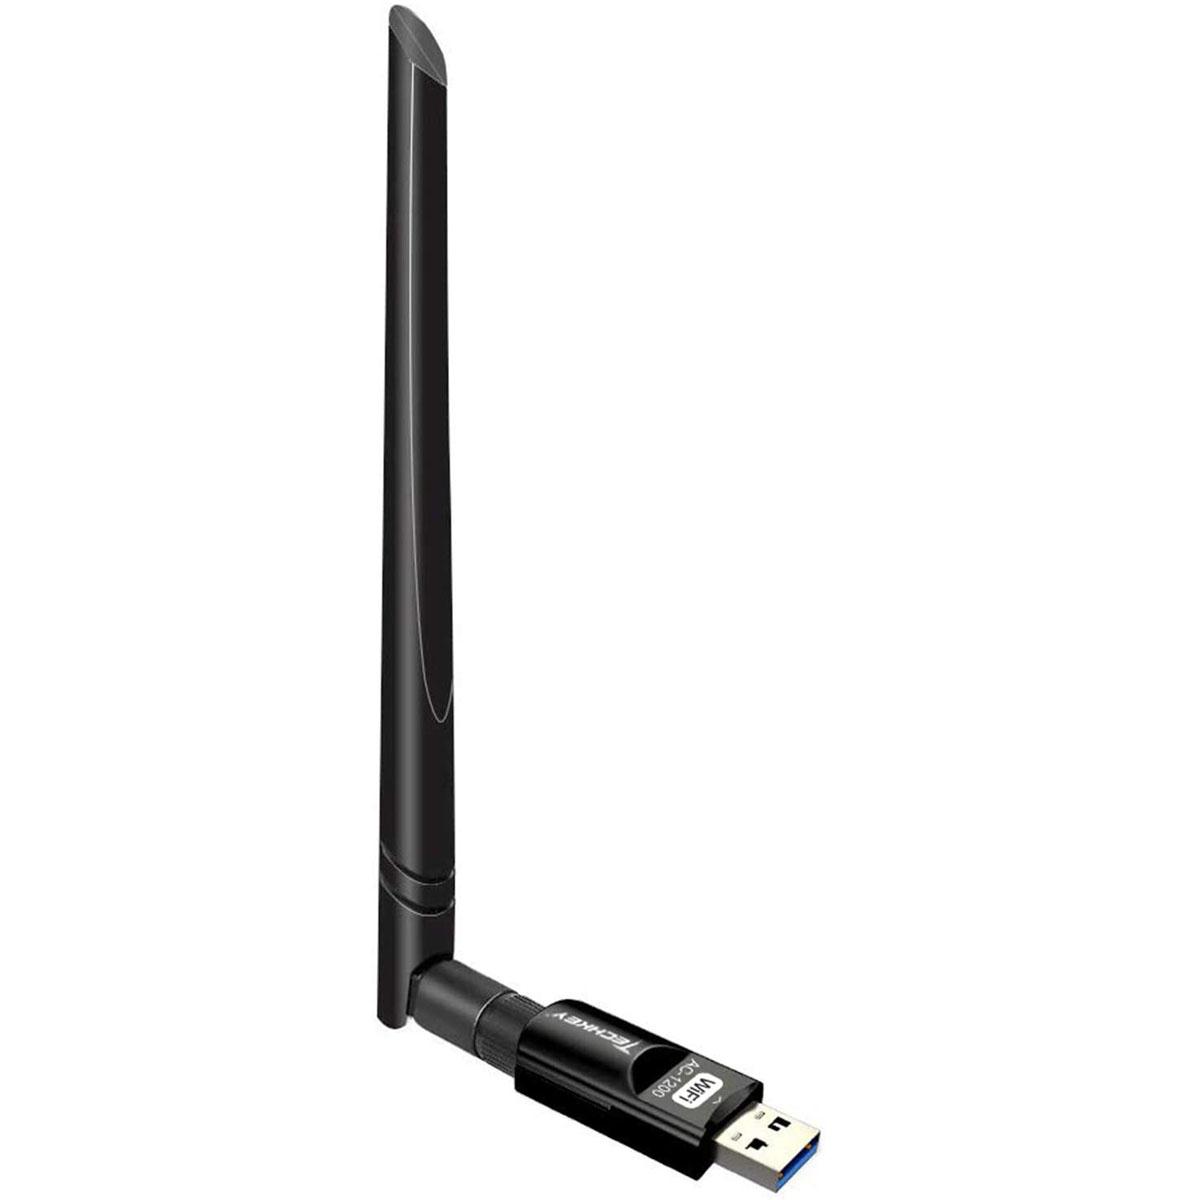 Techkey 1200Mbps 802.11ac Dual Band USB 3.0 WiFi Adapter for $8.04